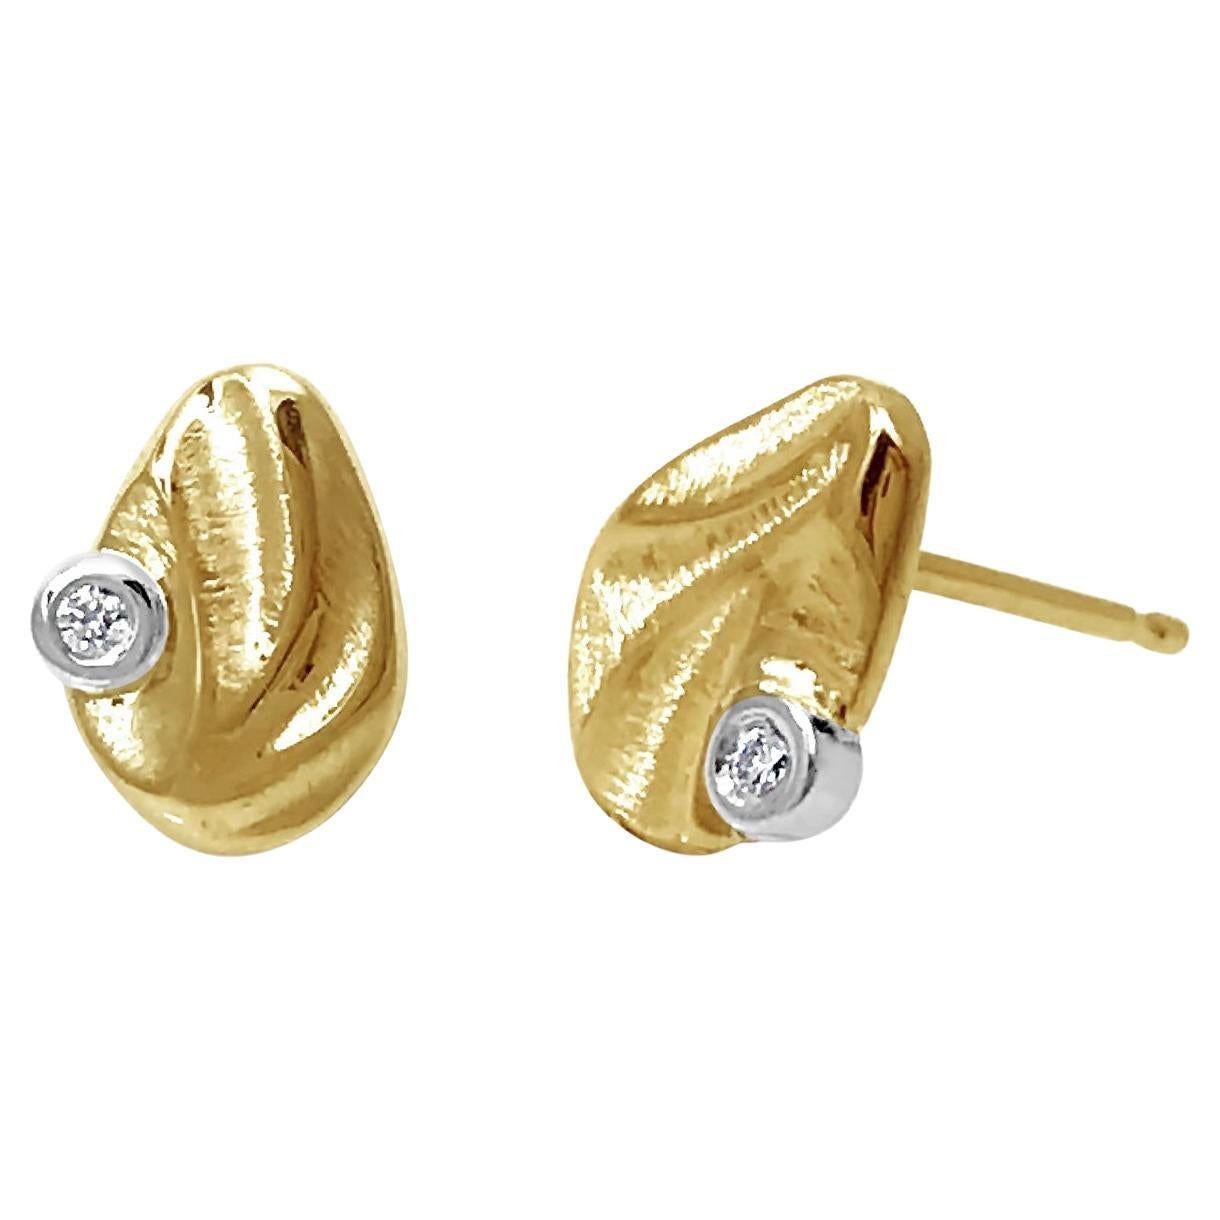 14 Karat Gold Dune Textured Pebble Studs with Diamond Accents from K.MITA For Sale